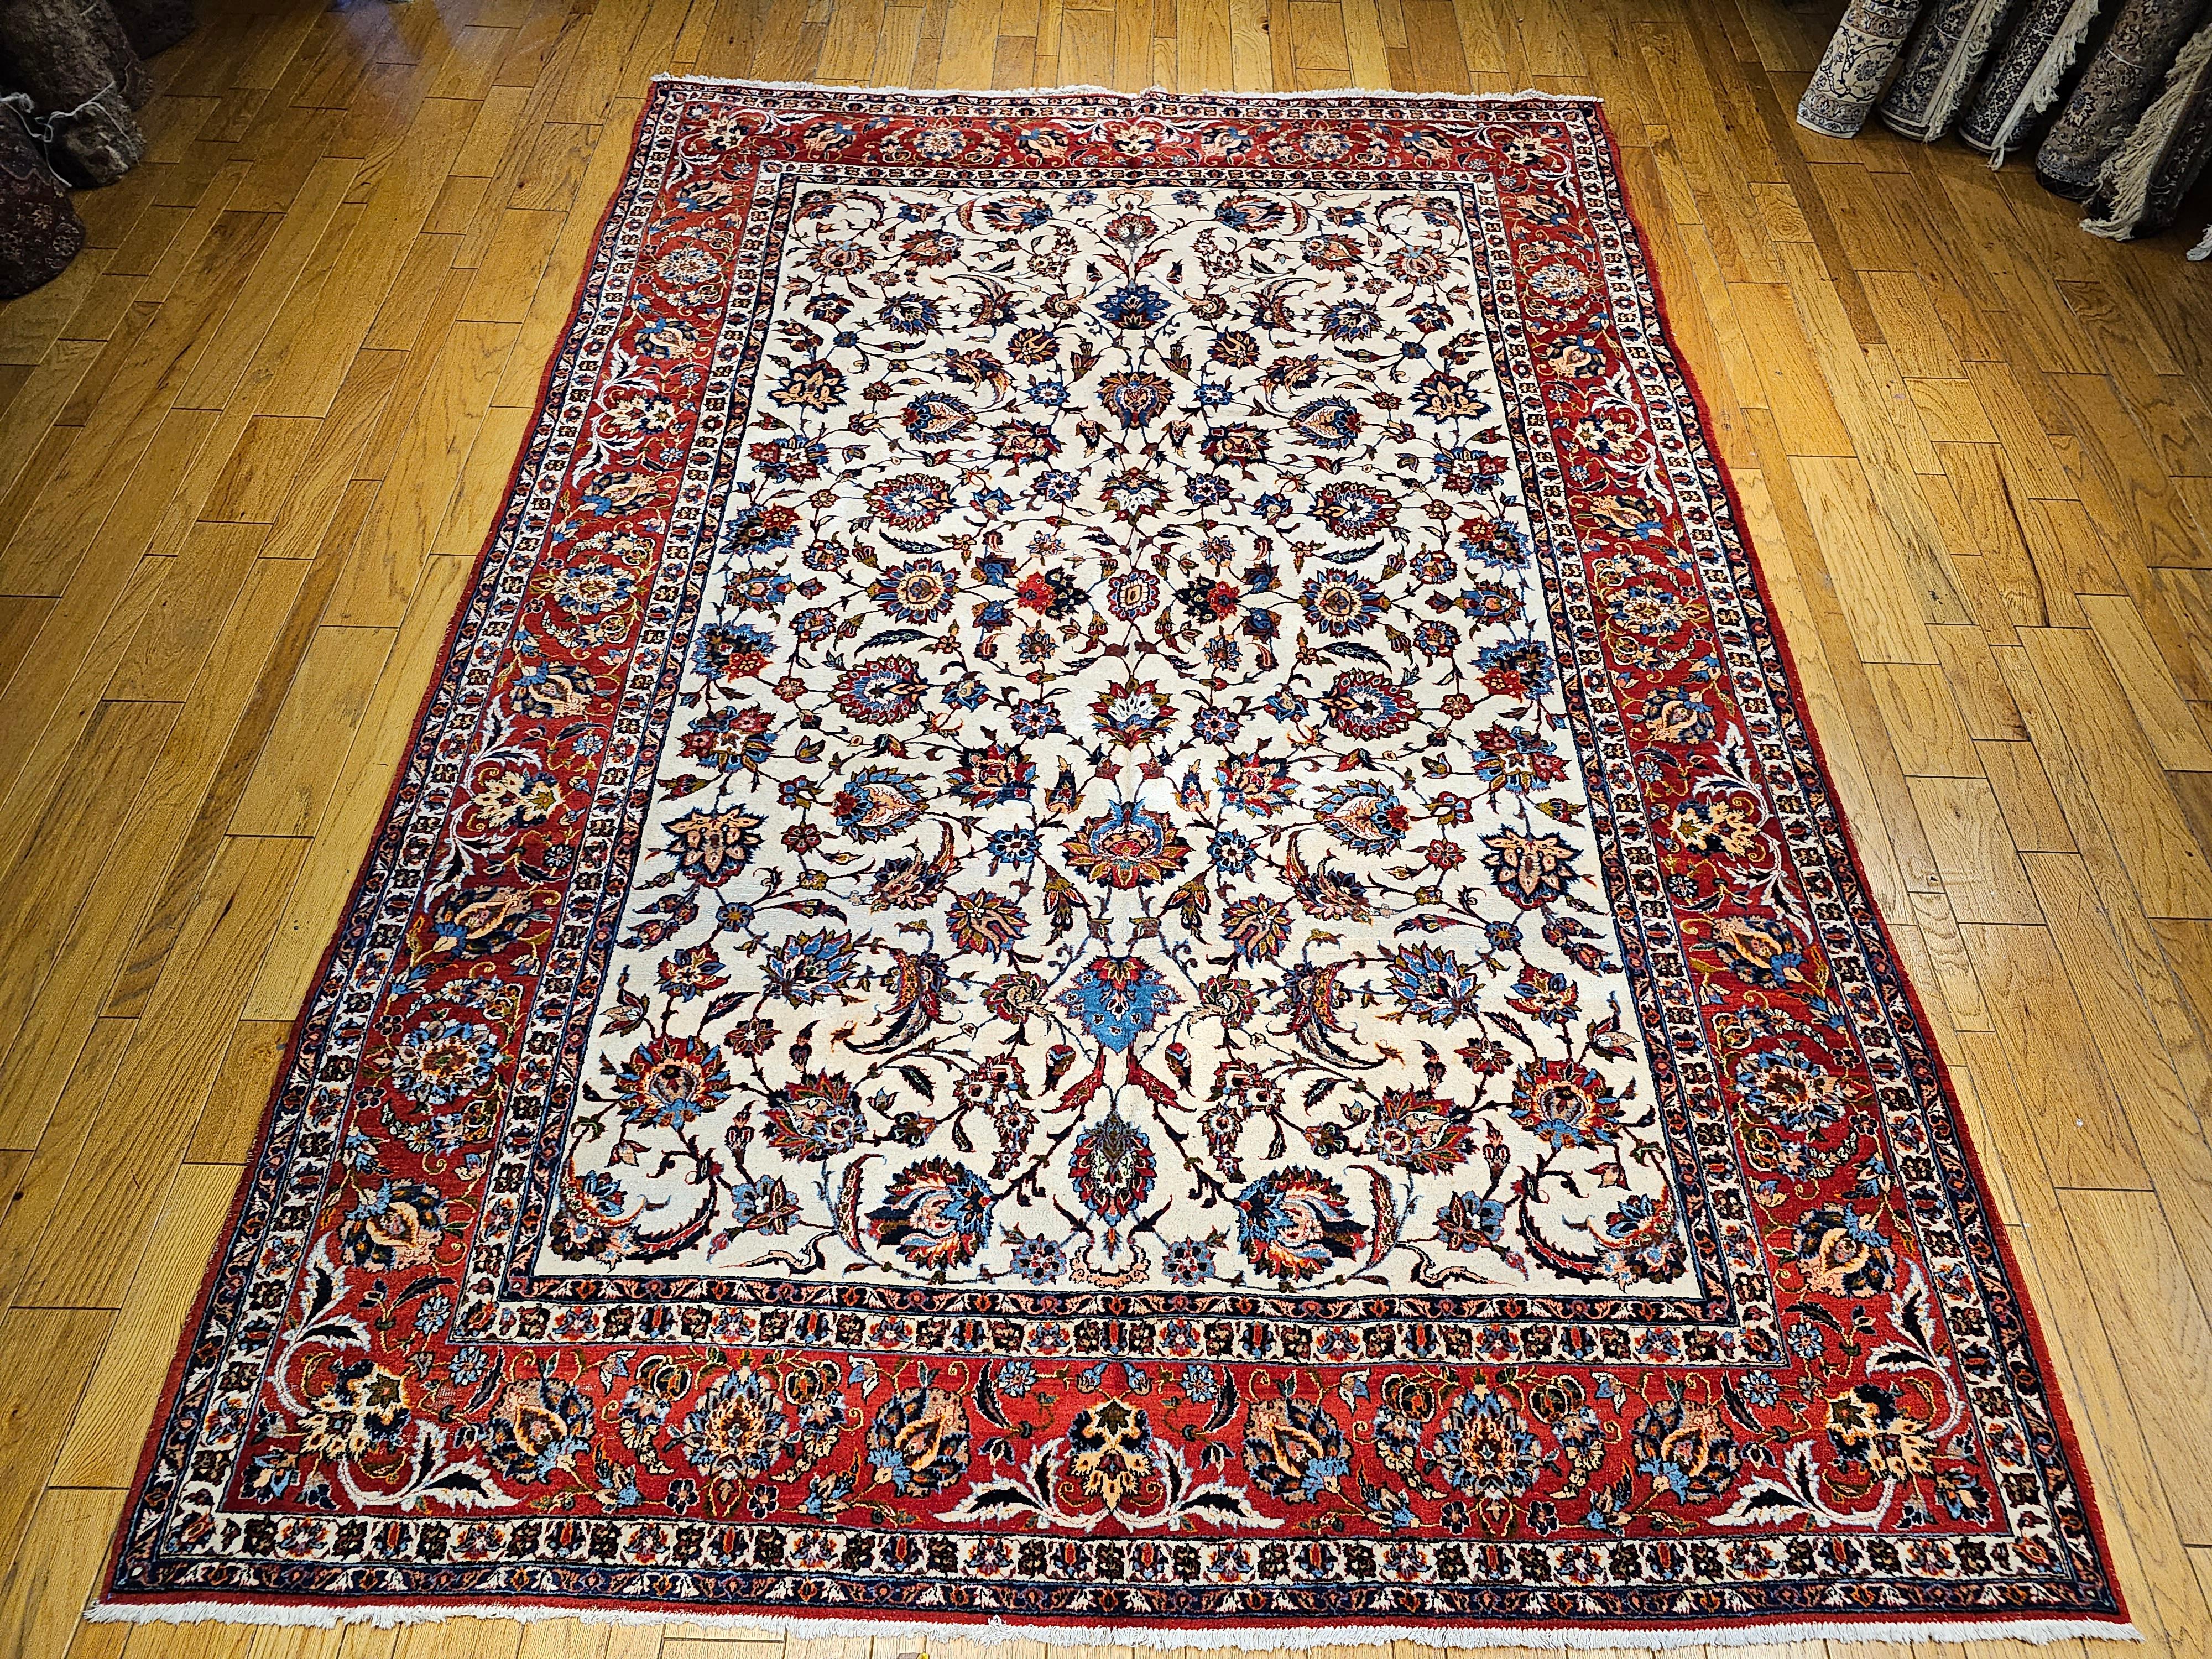  A room size Persian Isfahan in an allover floral pattern set in an ivory color field and a red border from the 2nd quarter of the 1900s.  The rug has a Shah Abbas large format “Leaf and Sickle” design with scrolling vines and leaves.  The design